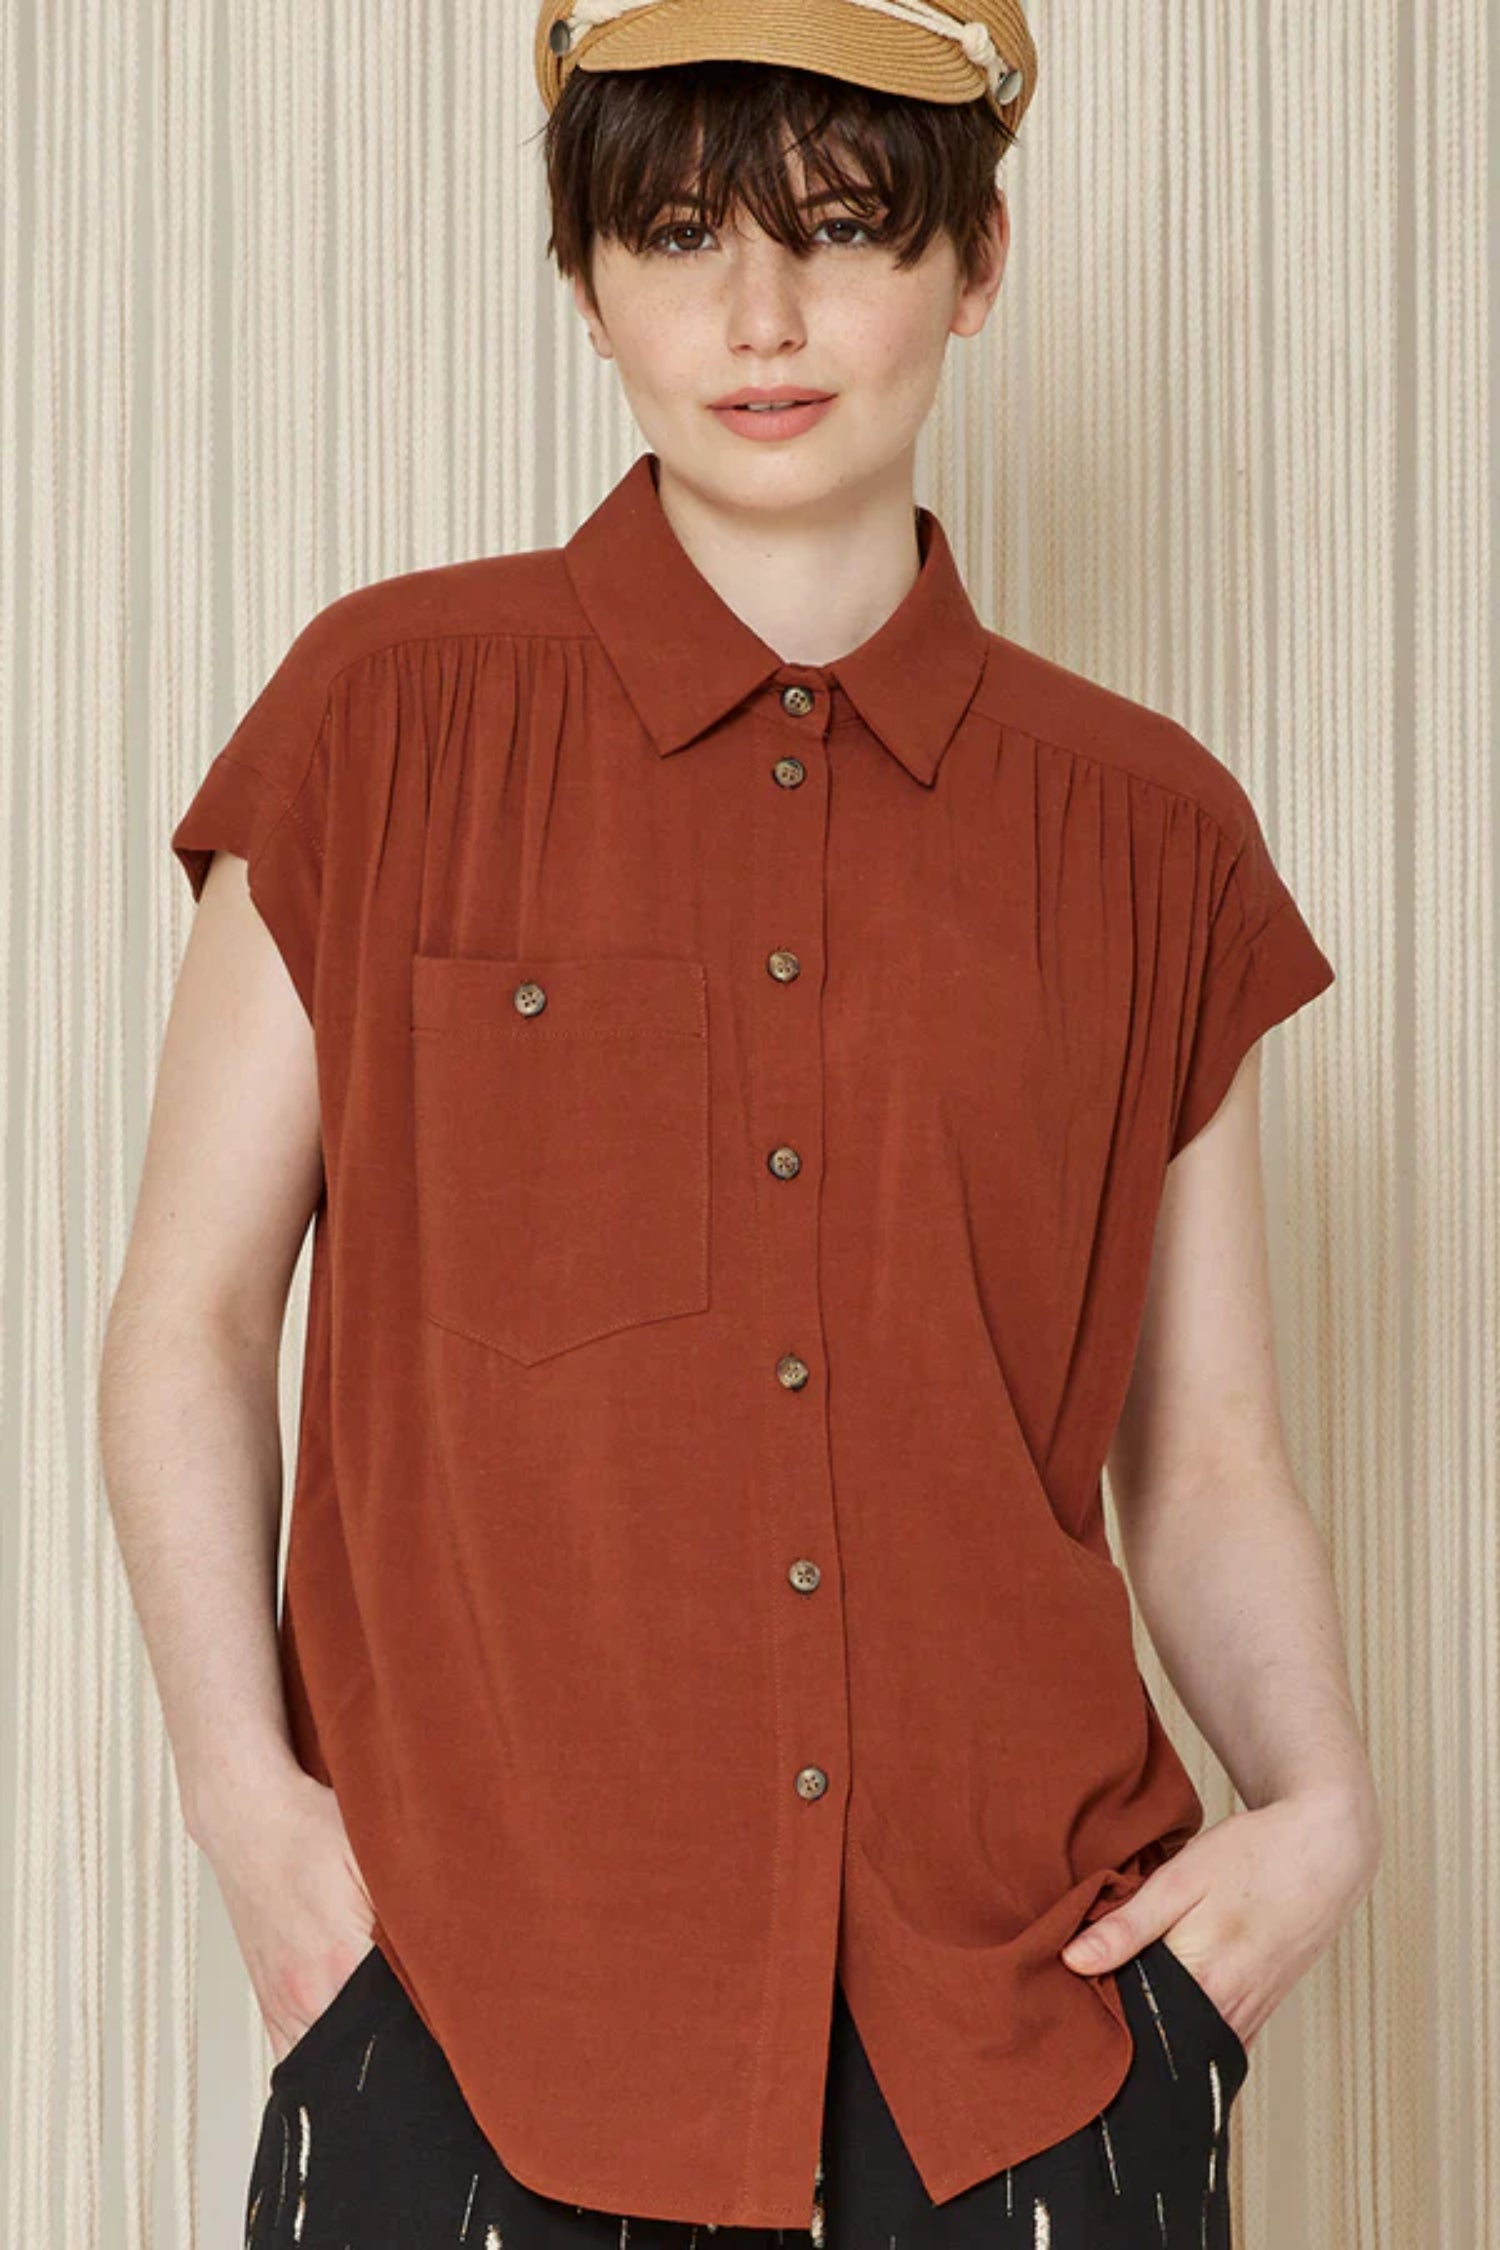 Muscari Top by Cokluch, Chestnut, collar, short dropped sleeves, button front, gathers at shoulders and back, curved hem, breast pocket, eco fabric, viscose, linen, sizes XS to XL, made in Montreal 